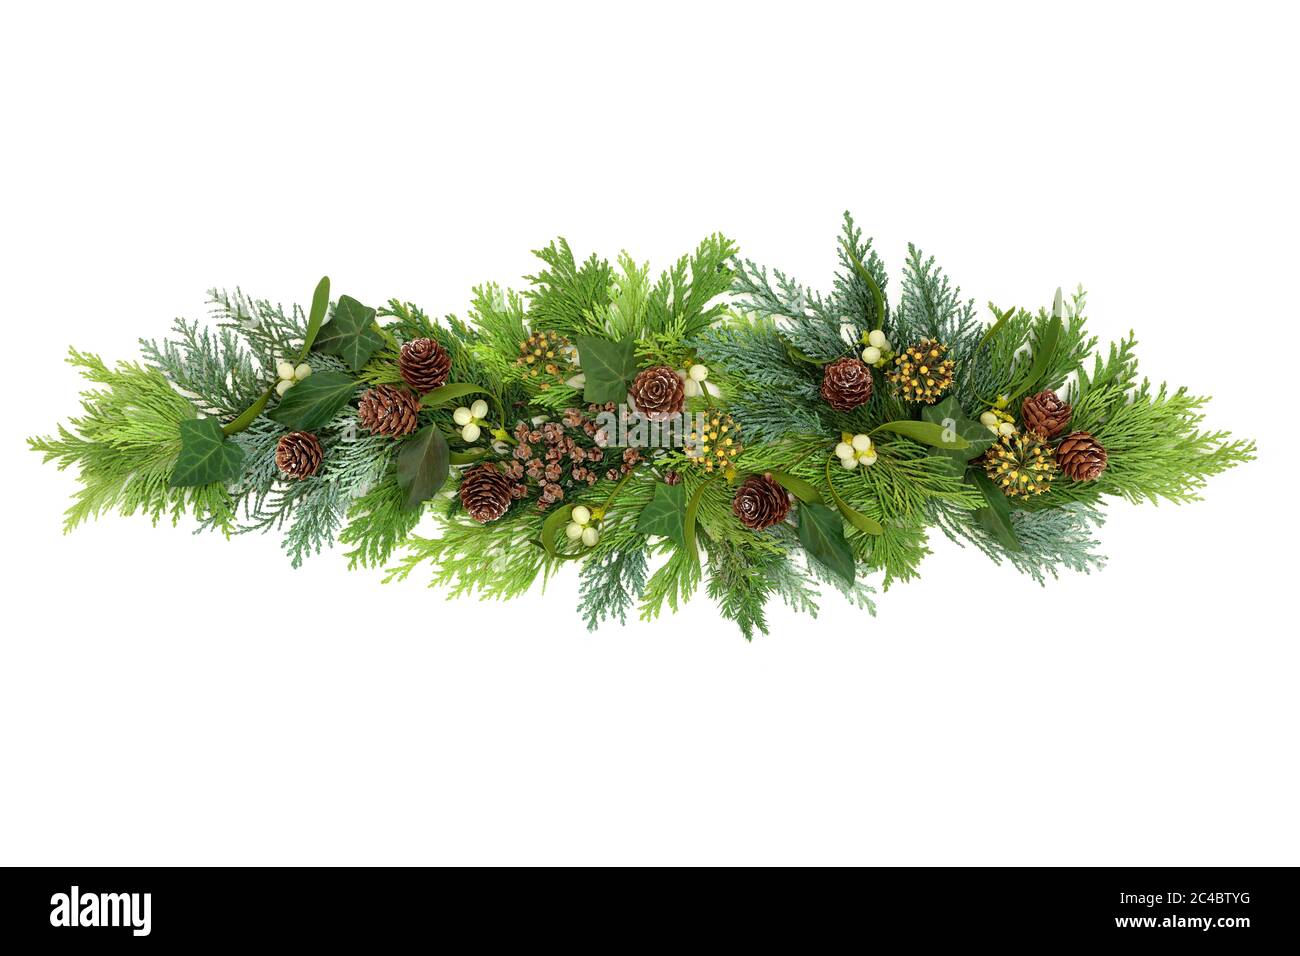 Winter greenery decorative display with winter greenery of cedar cypress firs, mistletoe, ivy and pine cones on white background. Stock Photo